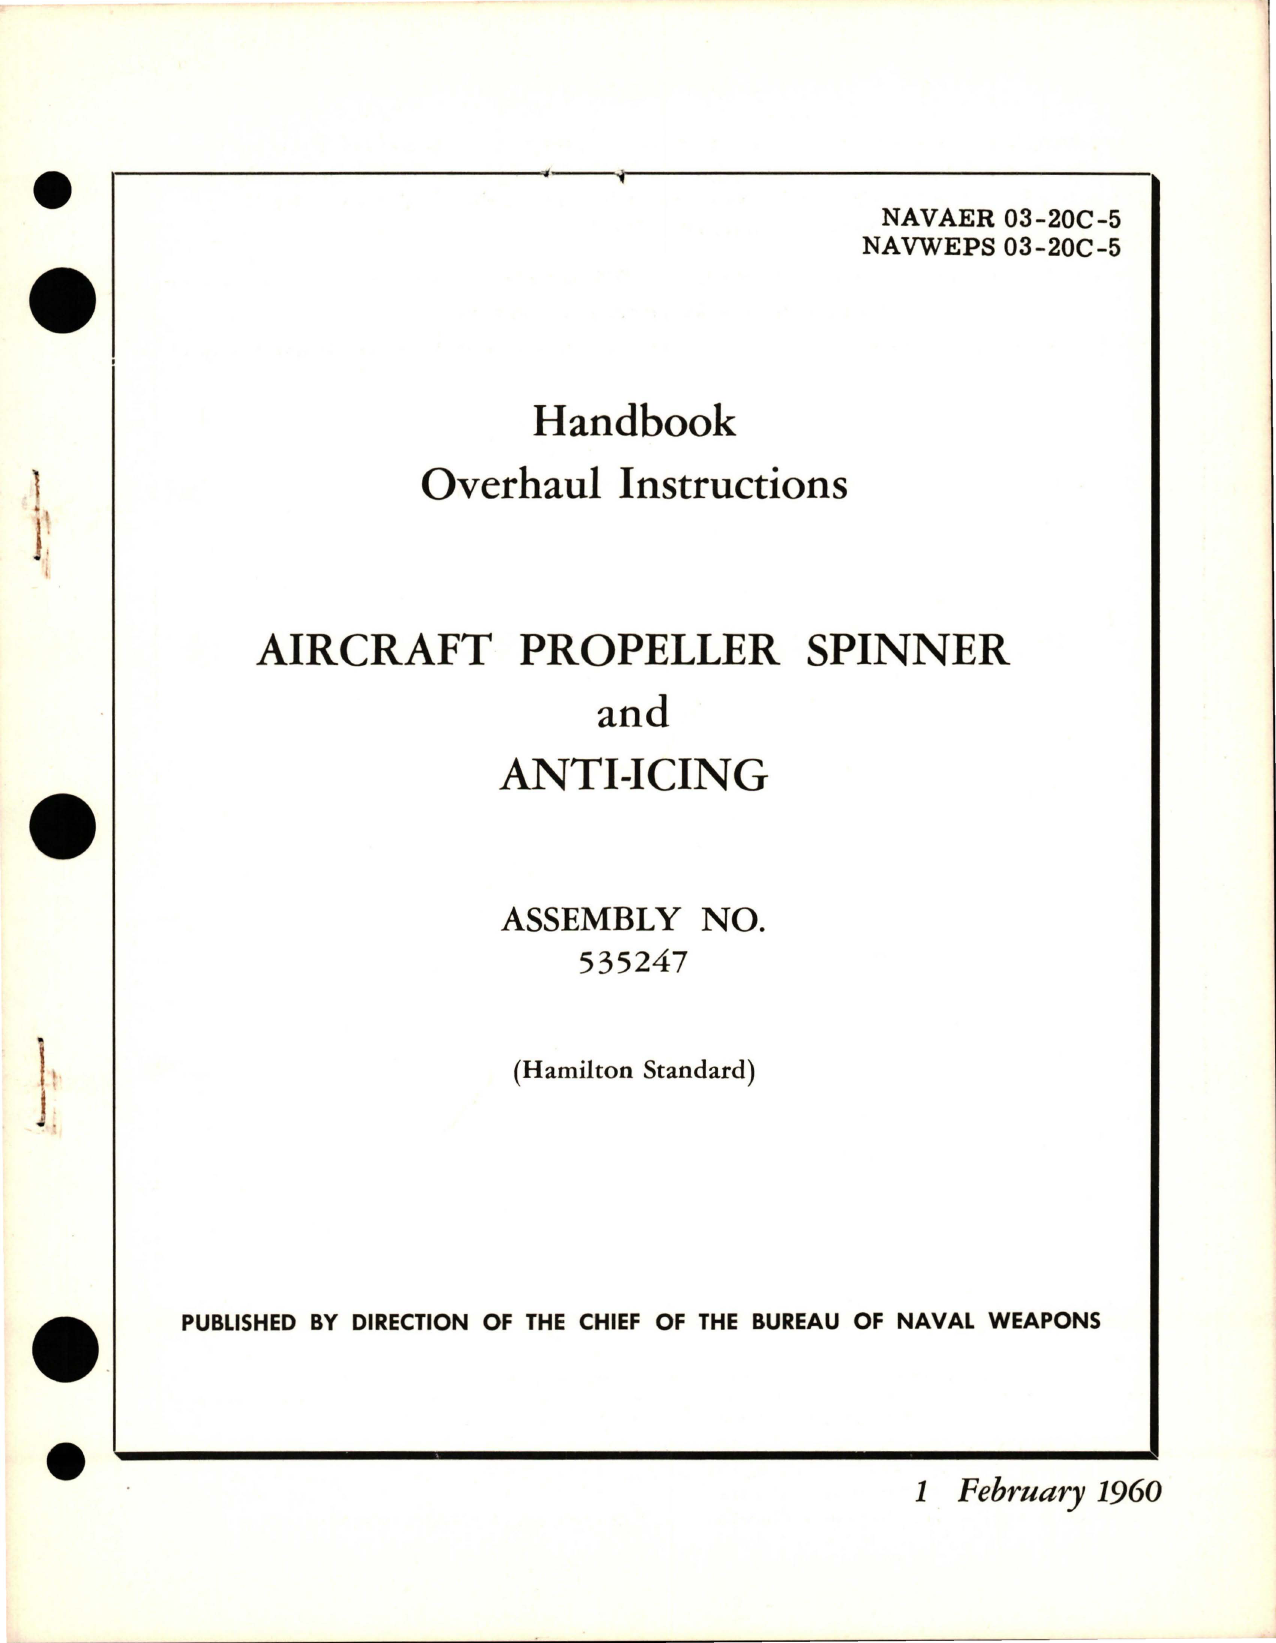 Sample page 1 from AirCorps Library document: Overhaul Instructions for Aircraft Propeller Spinner and Anti-Icing - Assembly 535247 